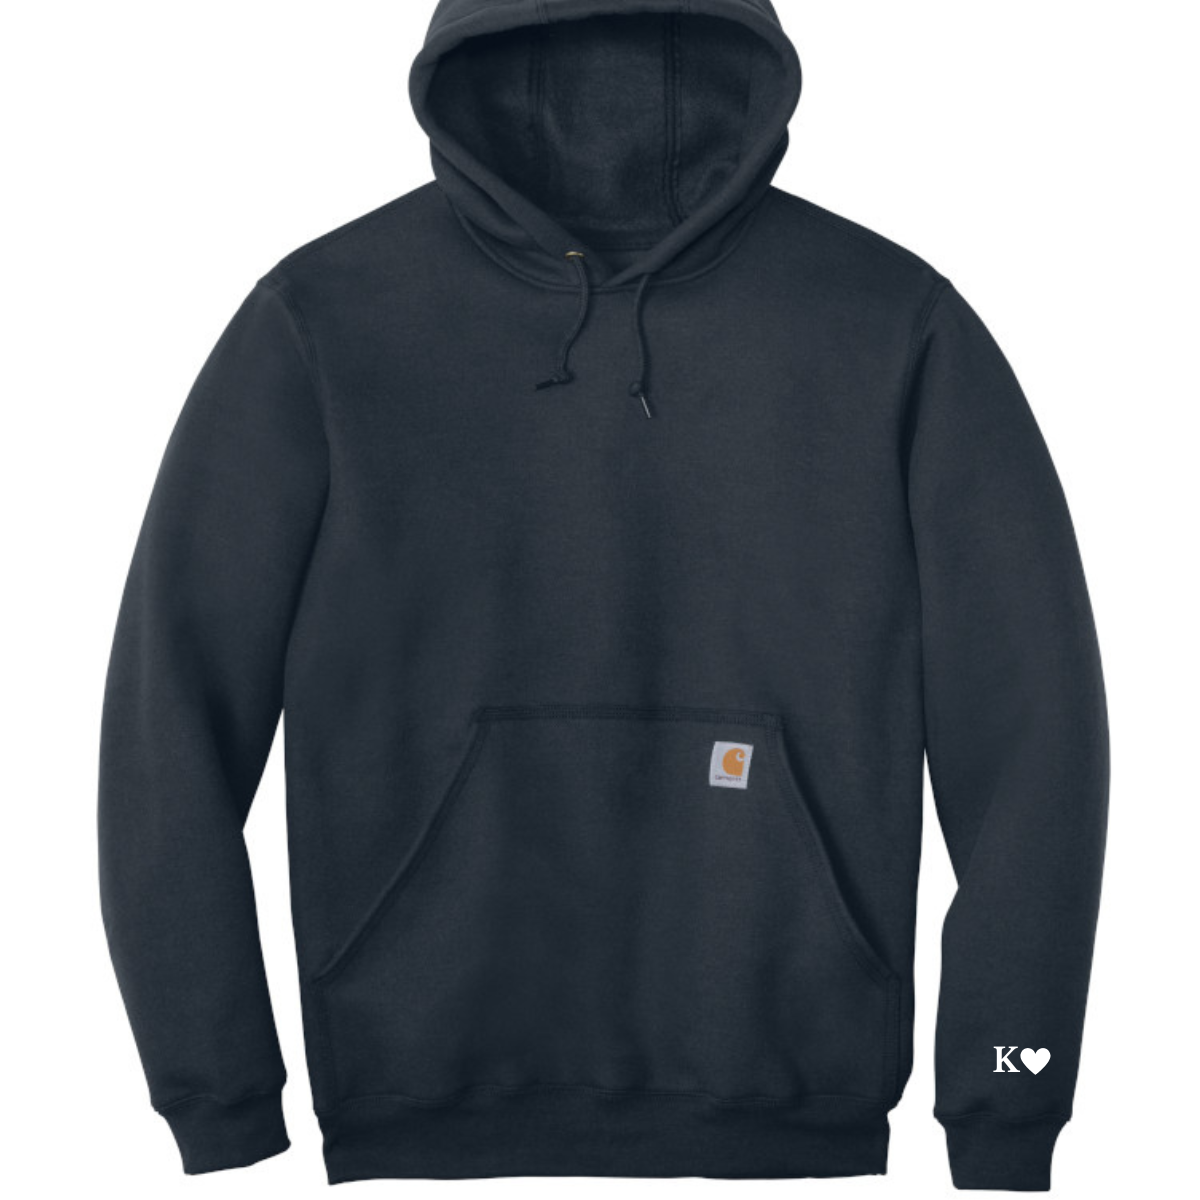 Carhartt Midweight hoodie Embroidered "Initials only on sleeve" couple's sweatshirt, Anniversary gift, Birthday gift